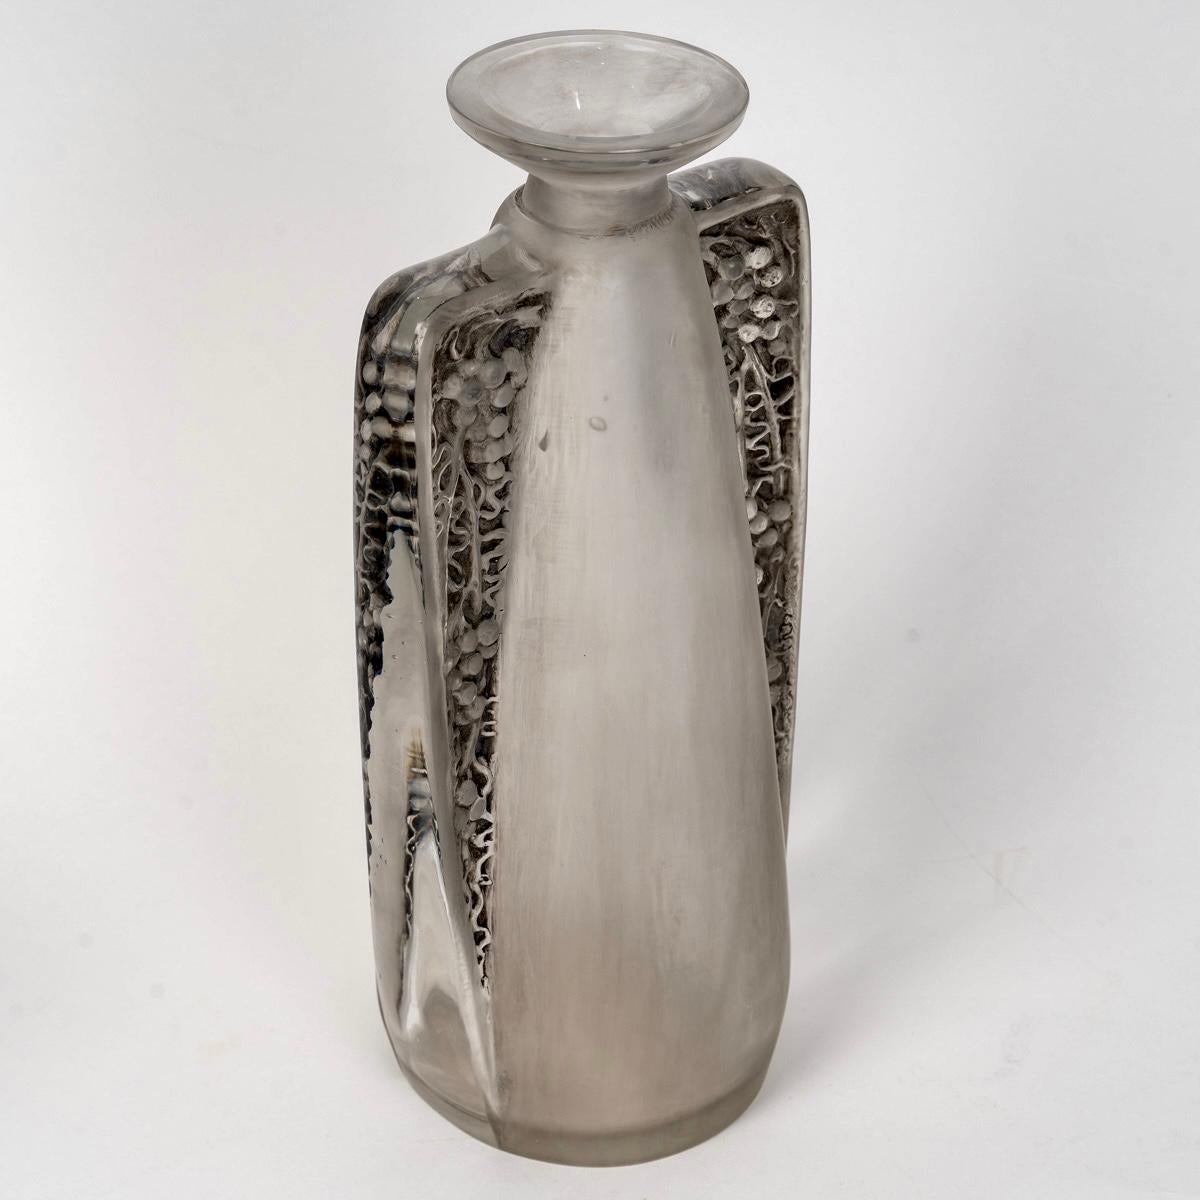 Art Deco 1911 Rene Lalique Vase Decanter Oreilles Gravees Frosted Glass with Grey Patina